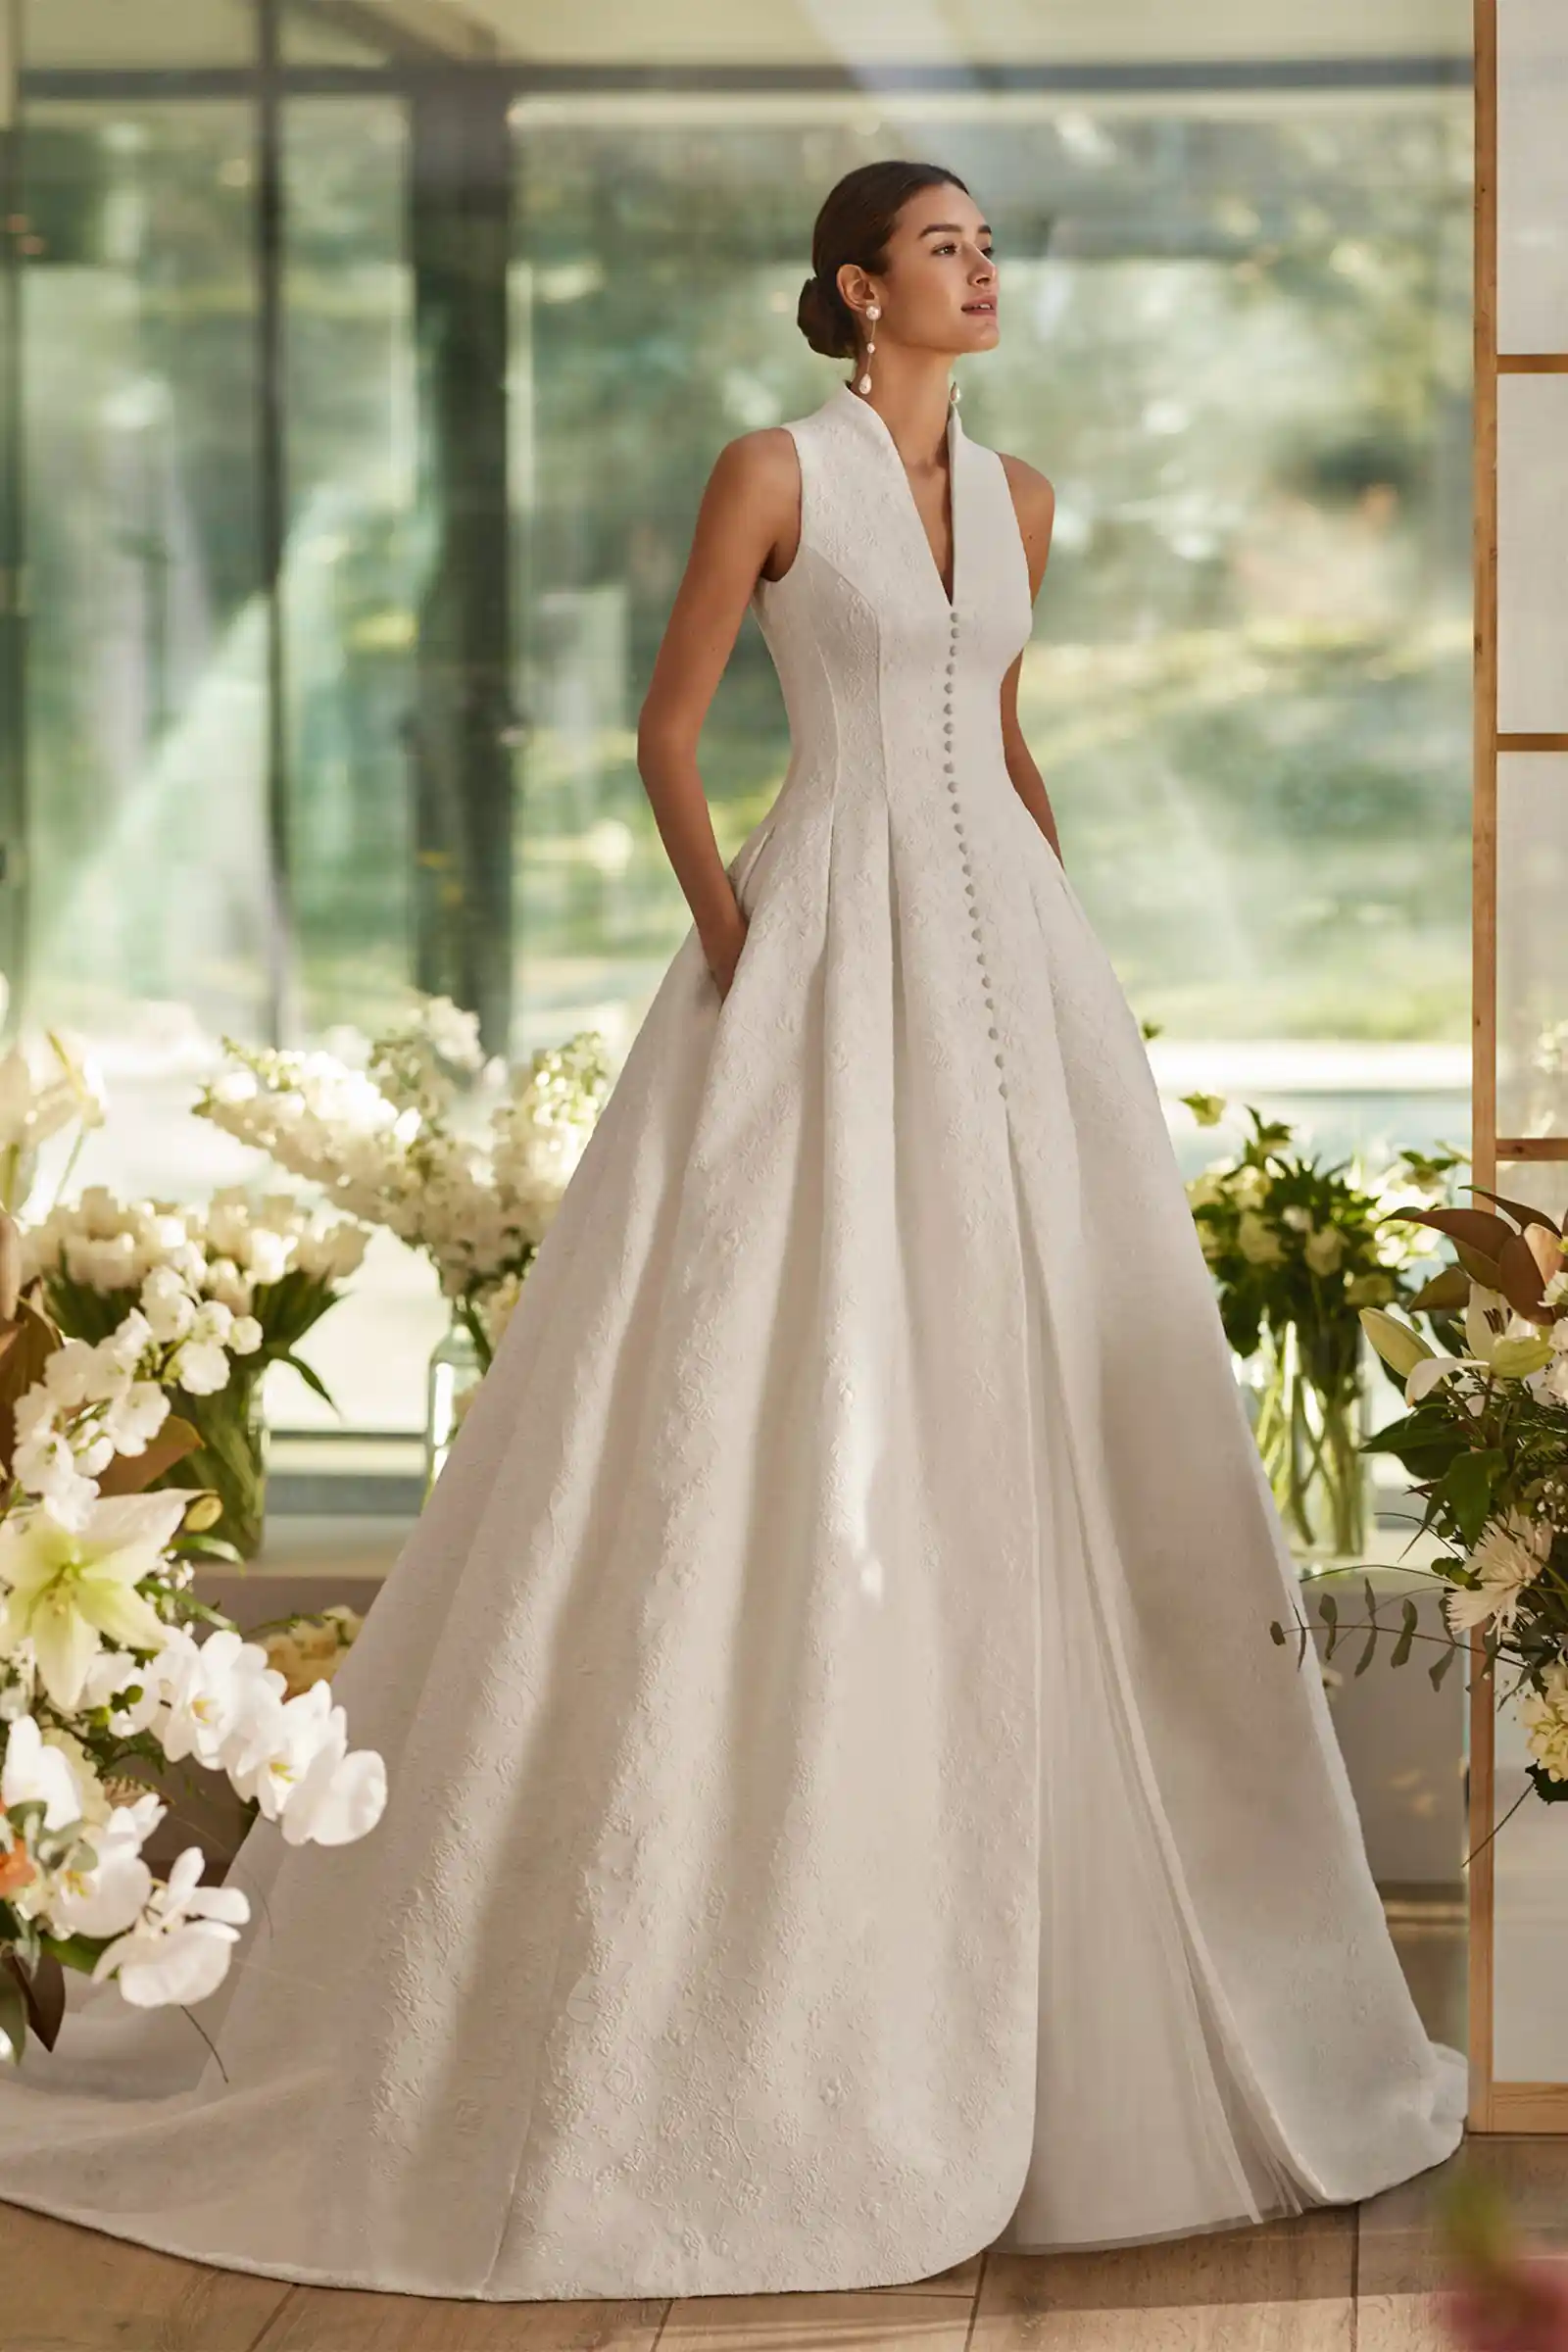 Featured image for “Brautkleid Malmo”